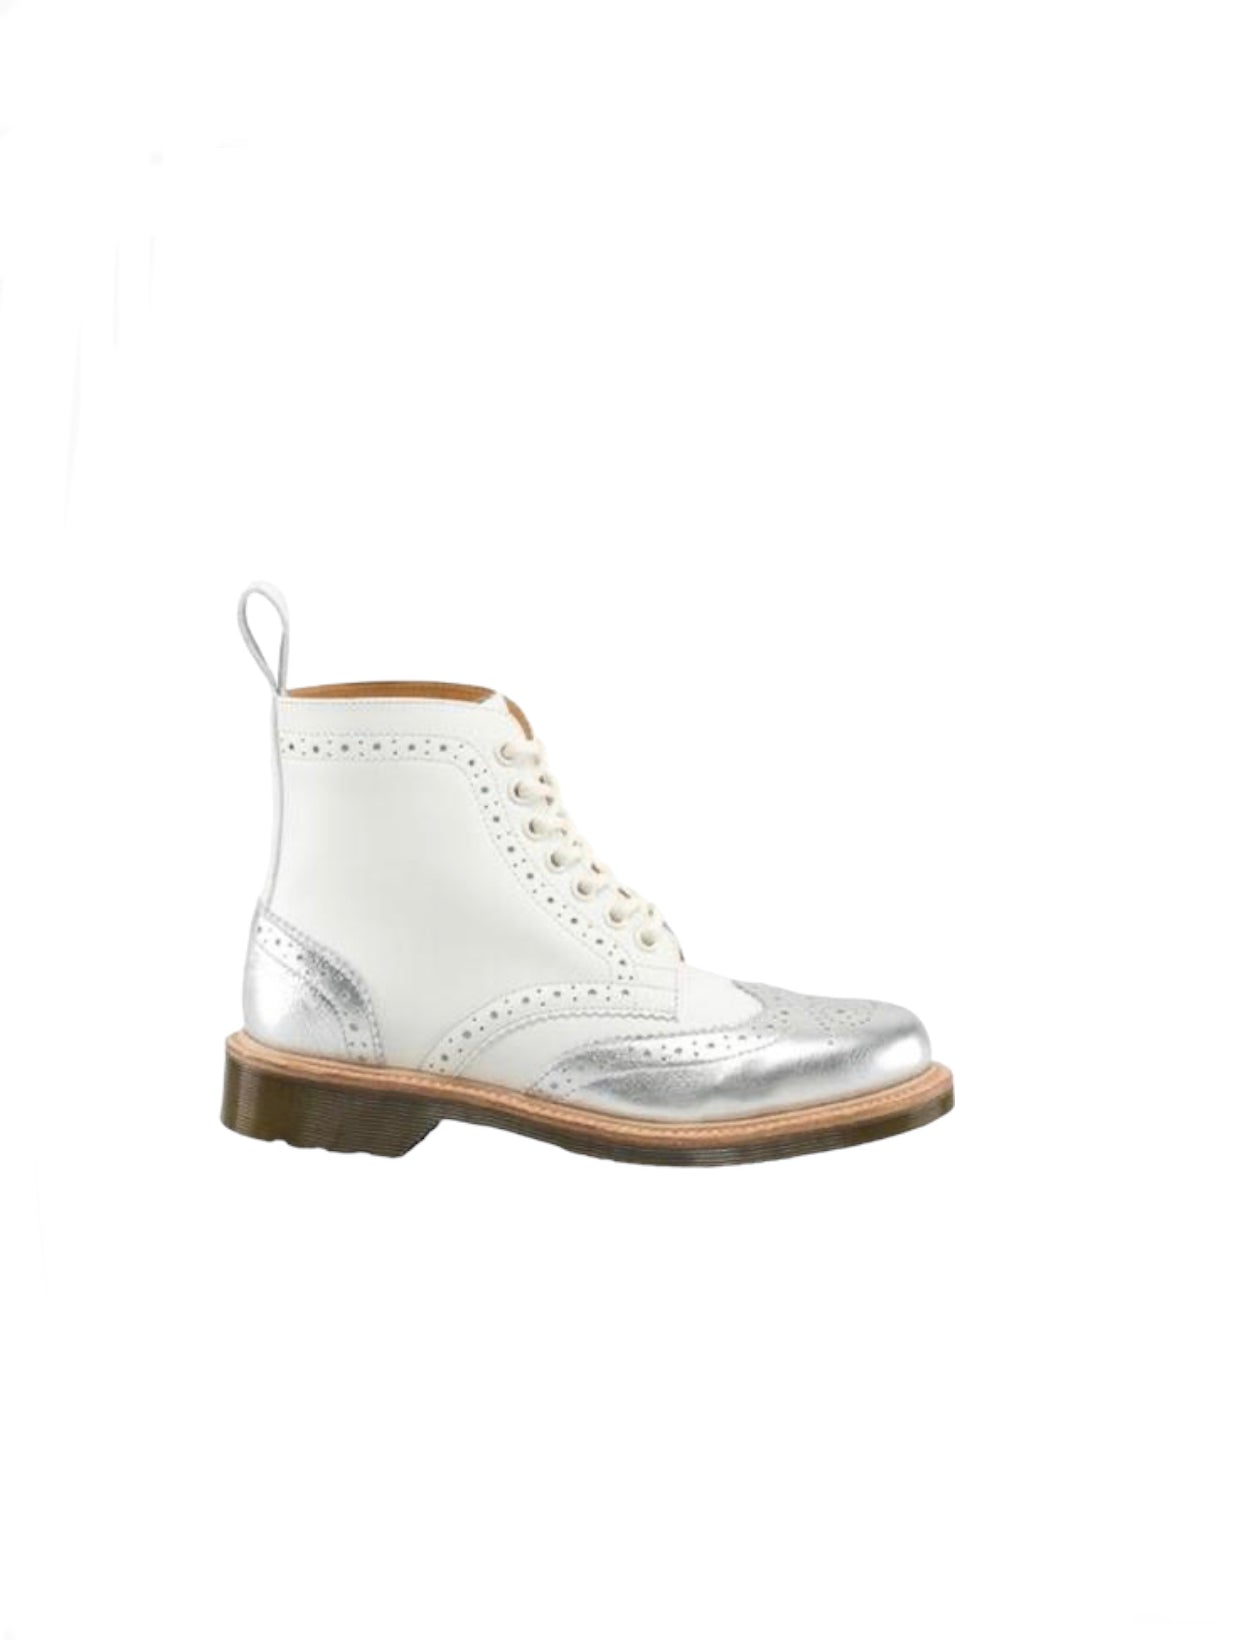 Load image into Gallery viewer, Dr Marten White/Silver Brogue Boots
